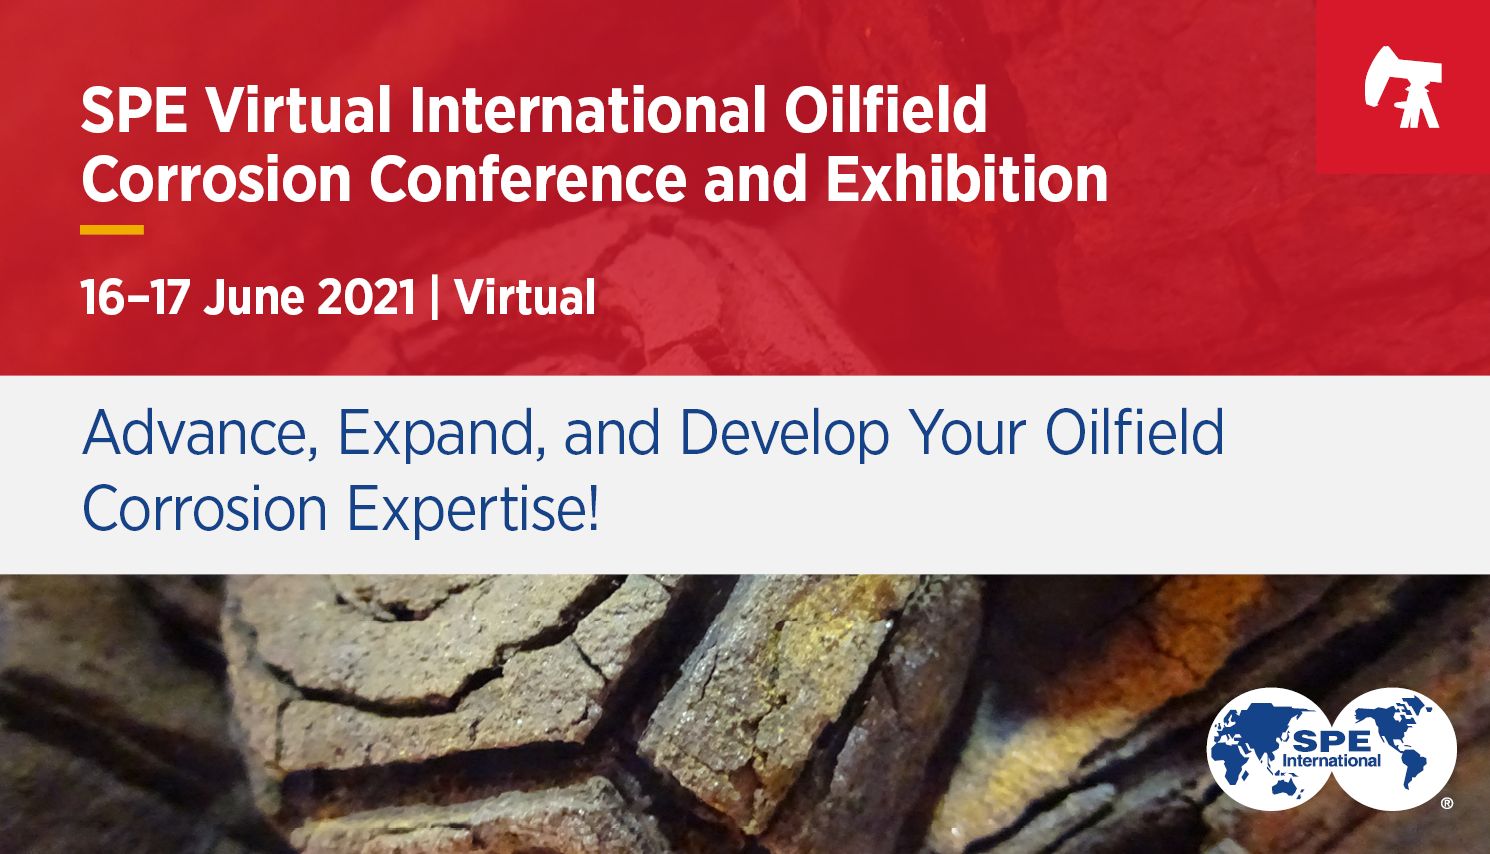 SPE Virtual International Oilfield Corrosion Conference and Exhibition